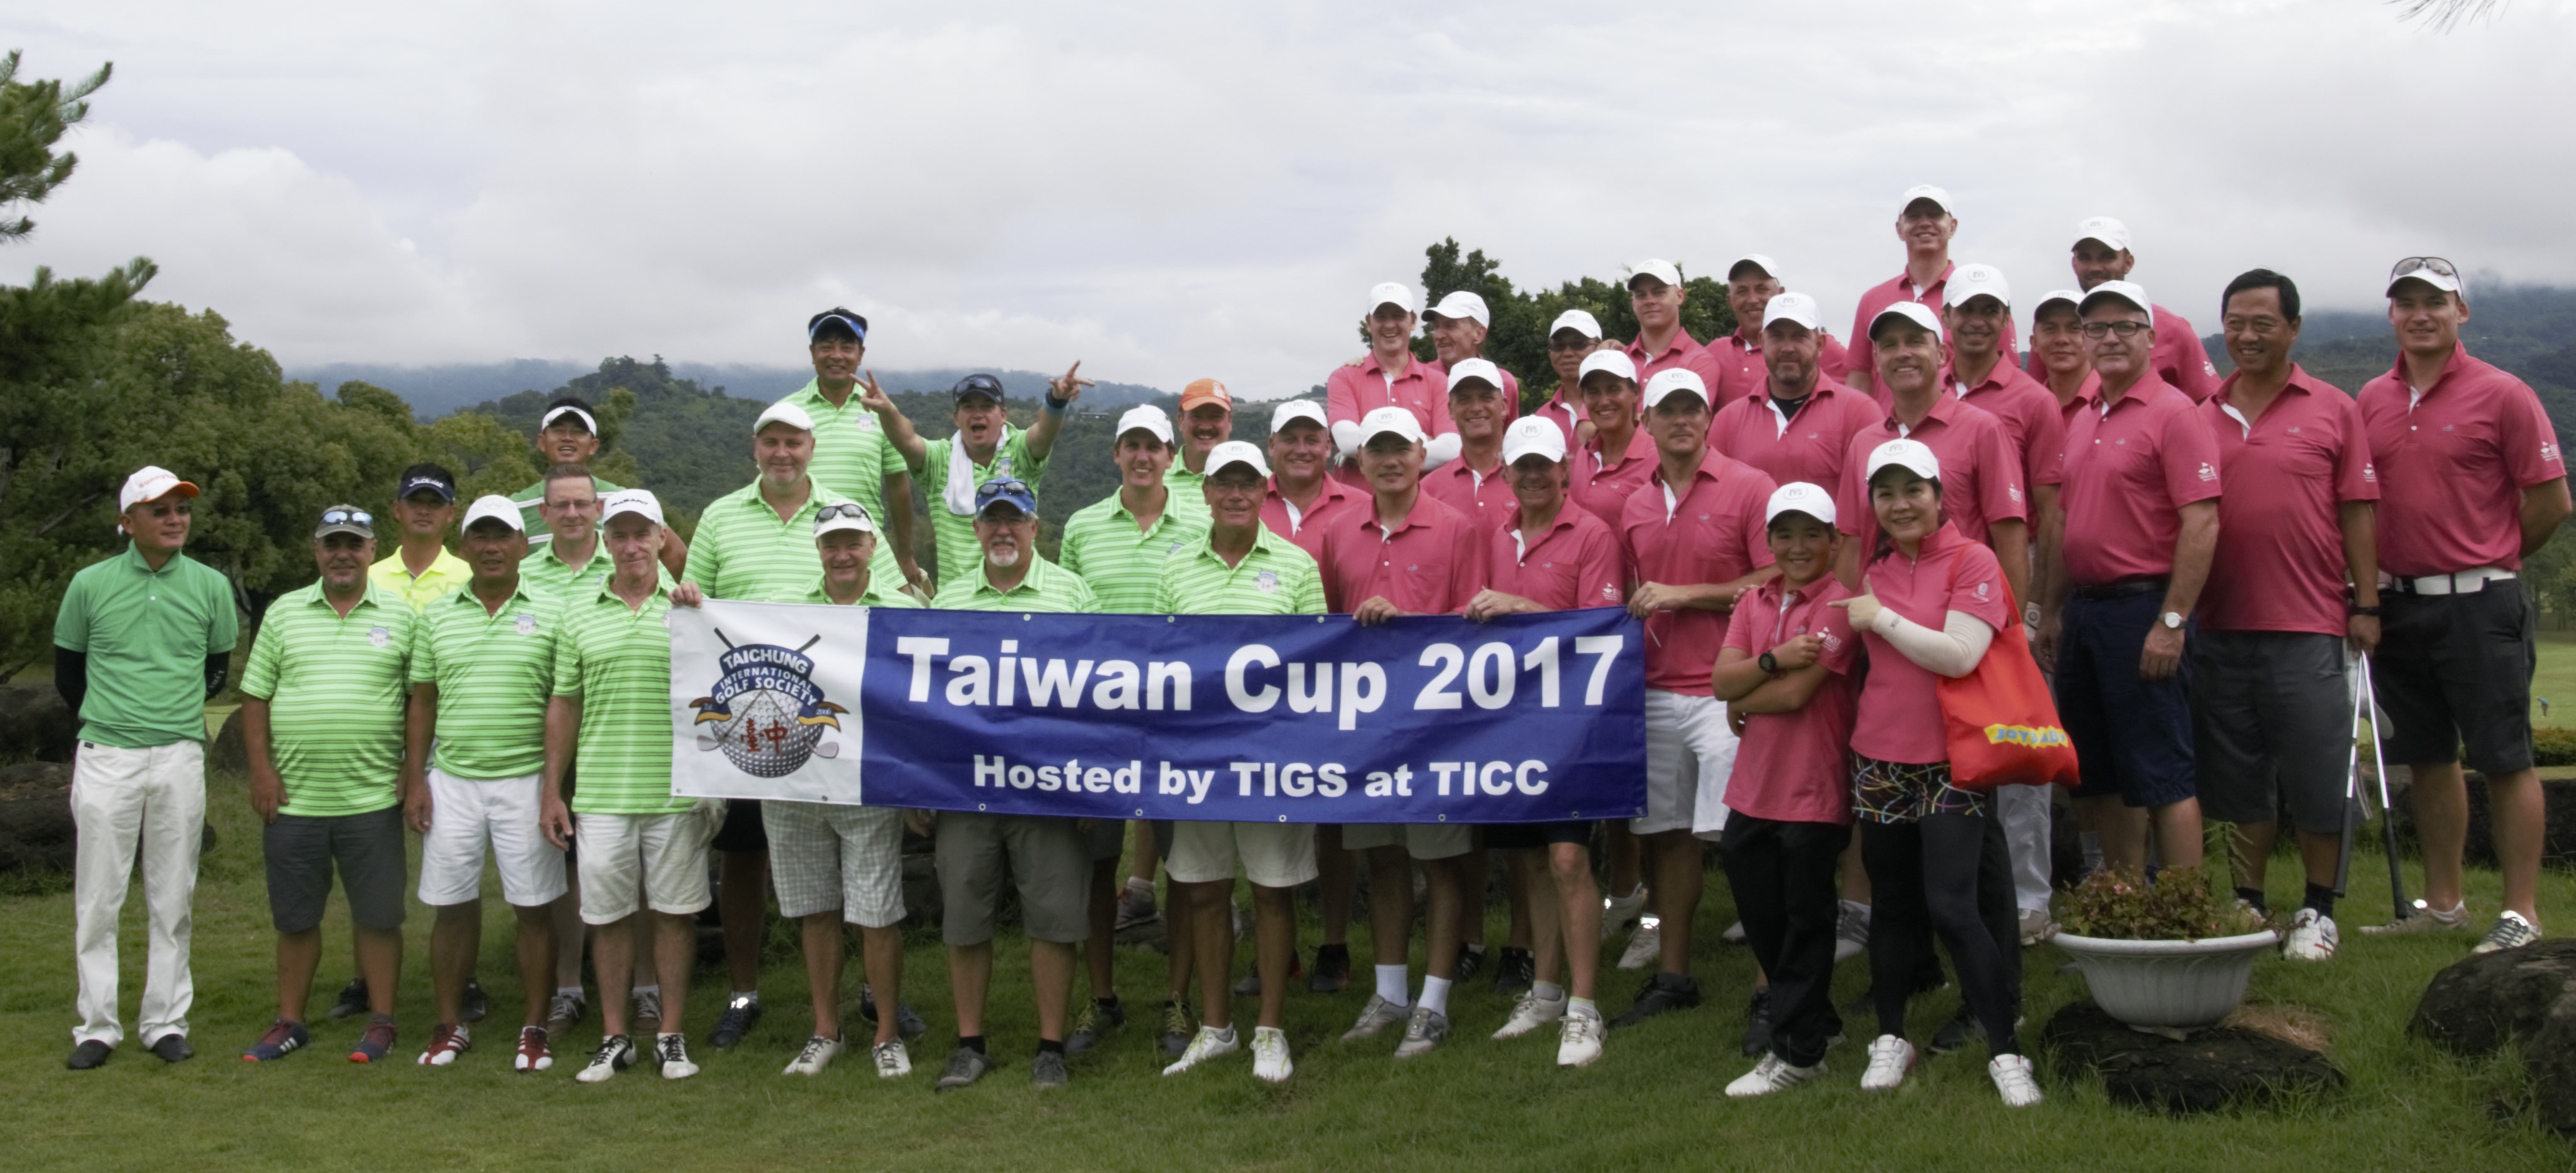 Oct 2017 7th Taiwan Cup TIGS and IGST Teams